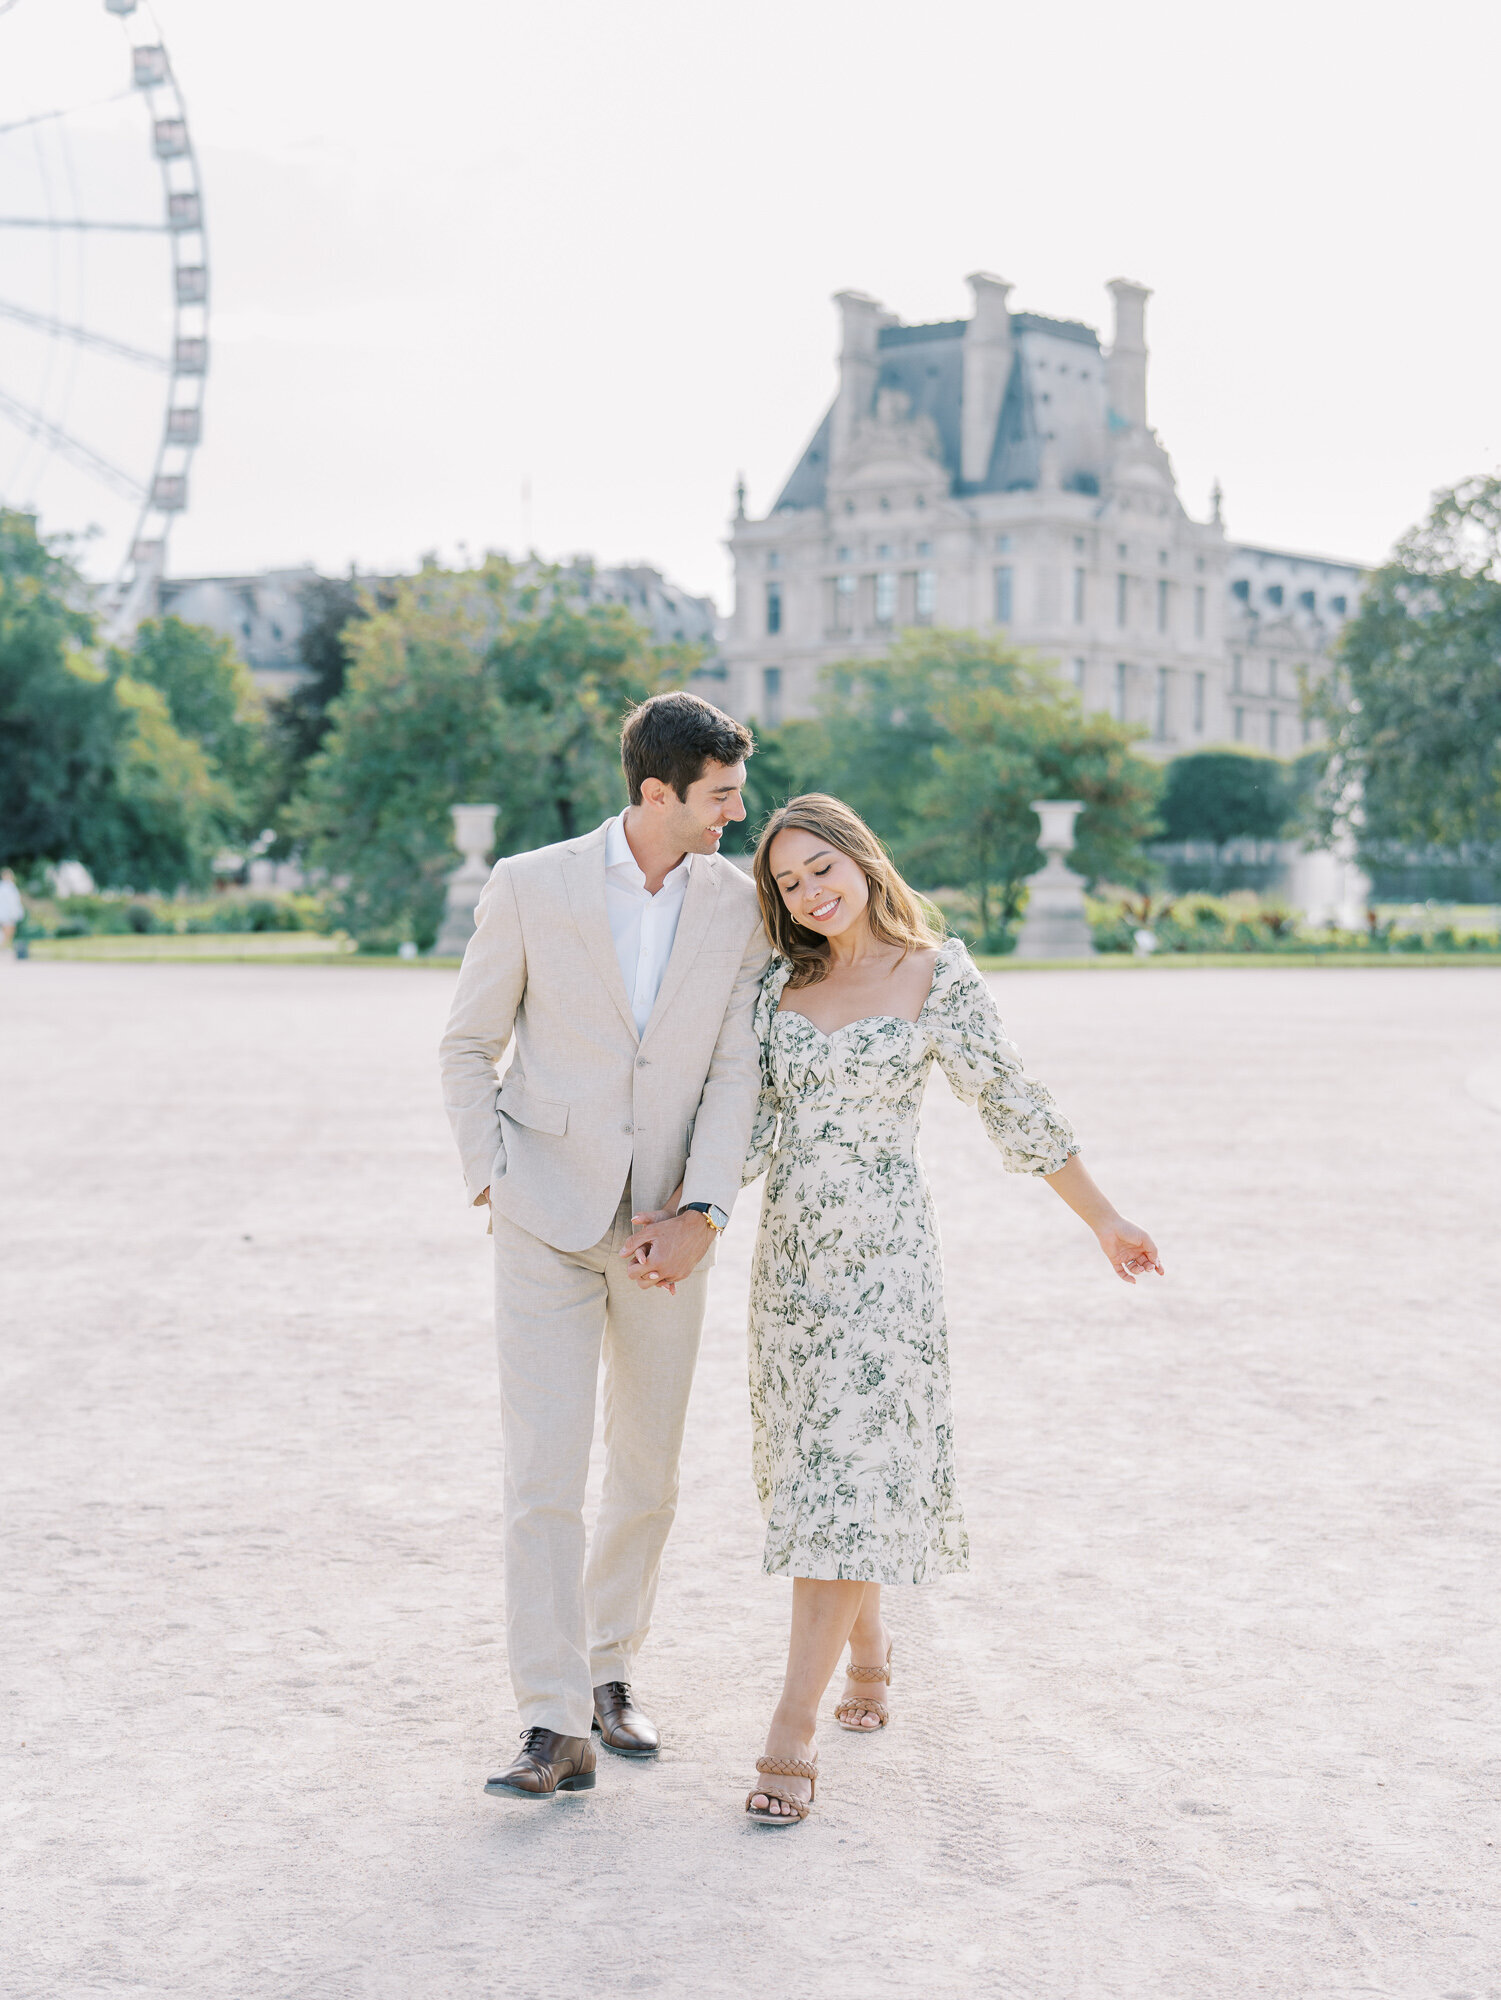 Christine & Kyle Paris Photosession by Tatyana Chaiko photographer in France-141